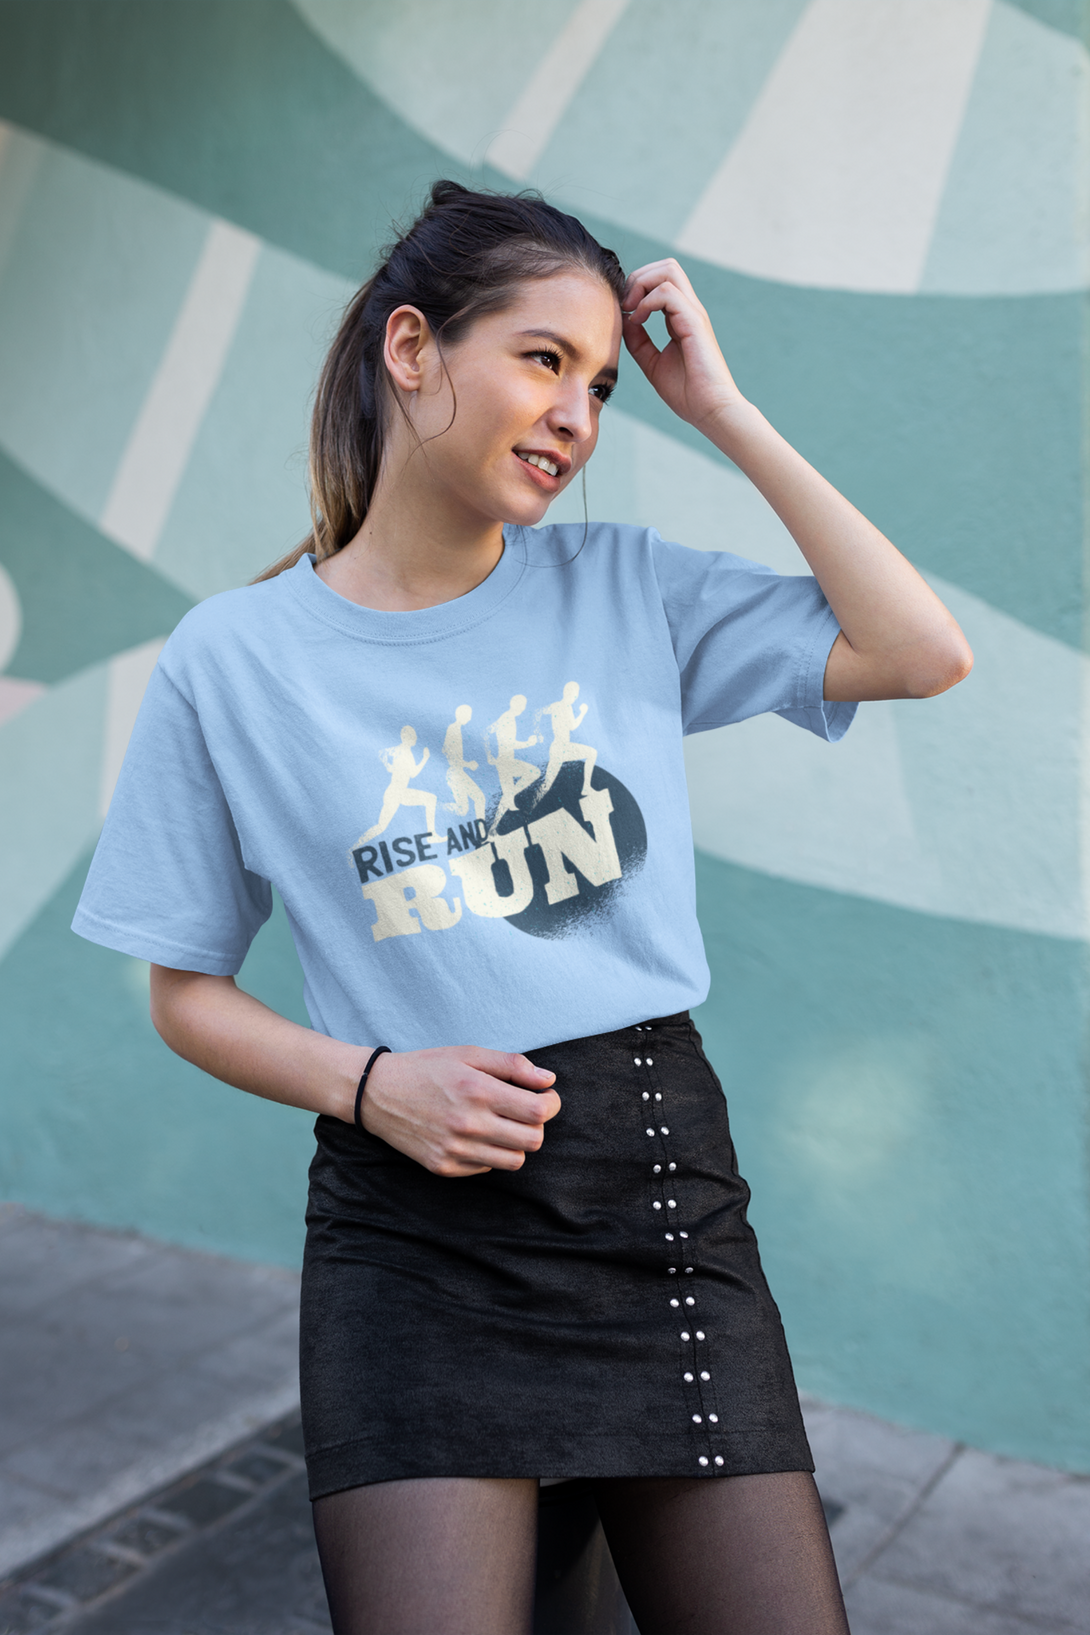 Rise And Run Printed Oversized T-Shirt For Women - WowWaves - 4